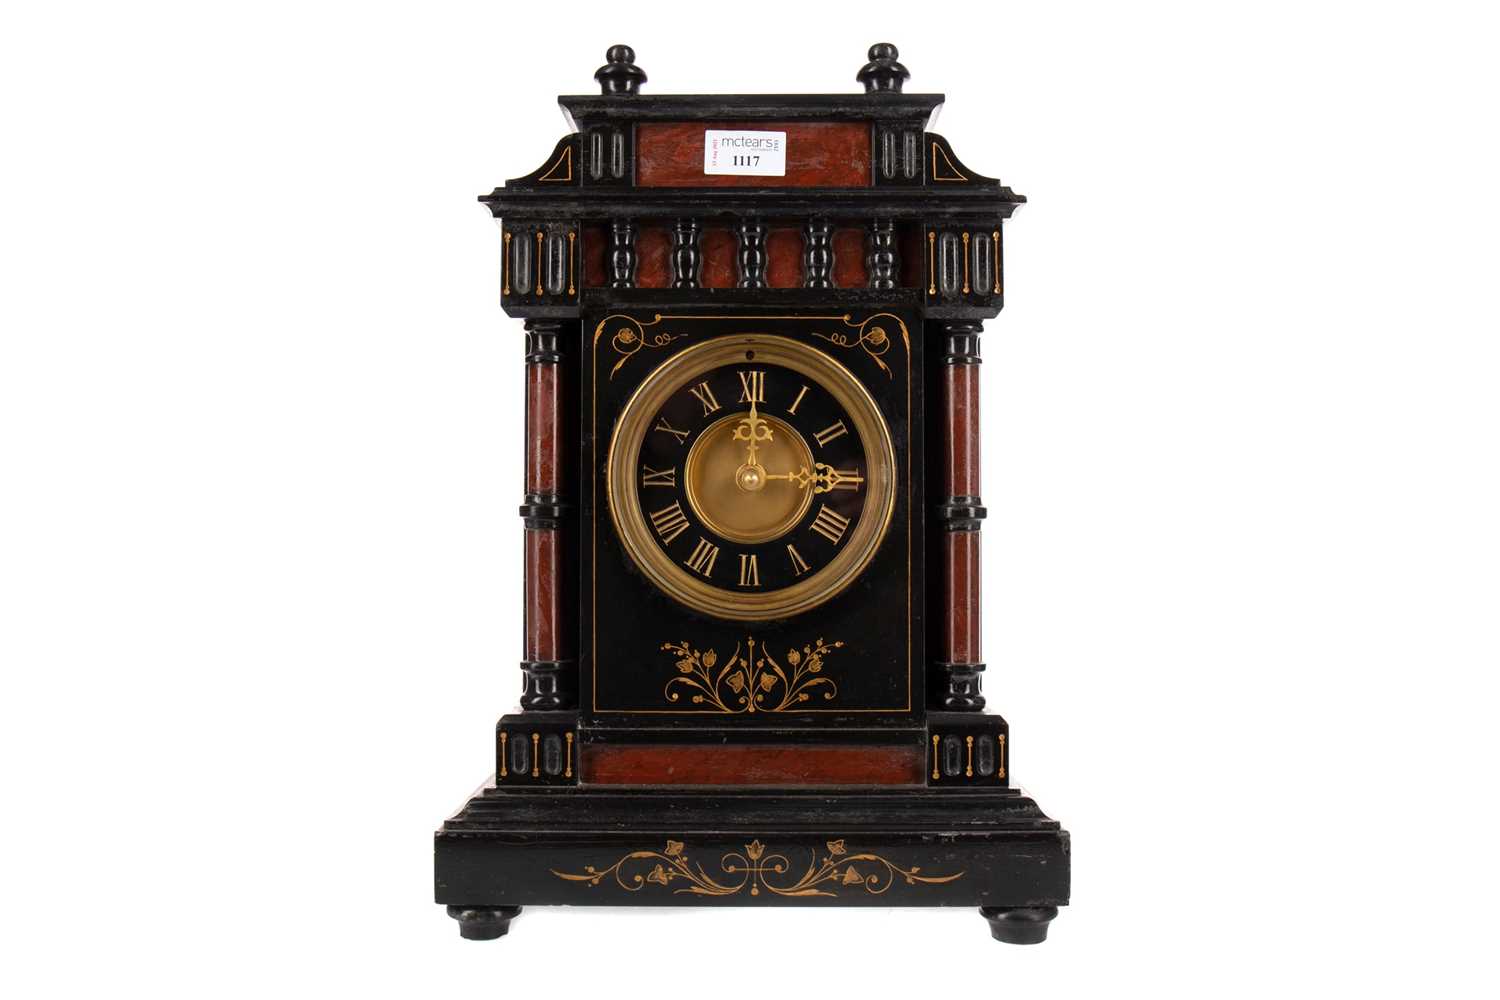 Lot 1117 - AN UNUSUAL VICTORIAN BLACK SLATE AND ROUGE MARBLE MANTEL CLOCK